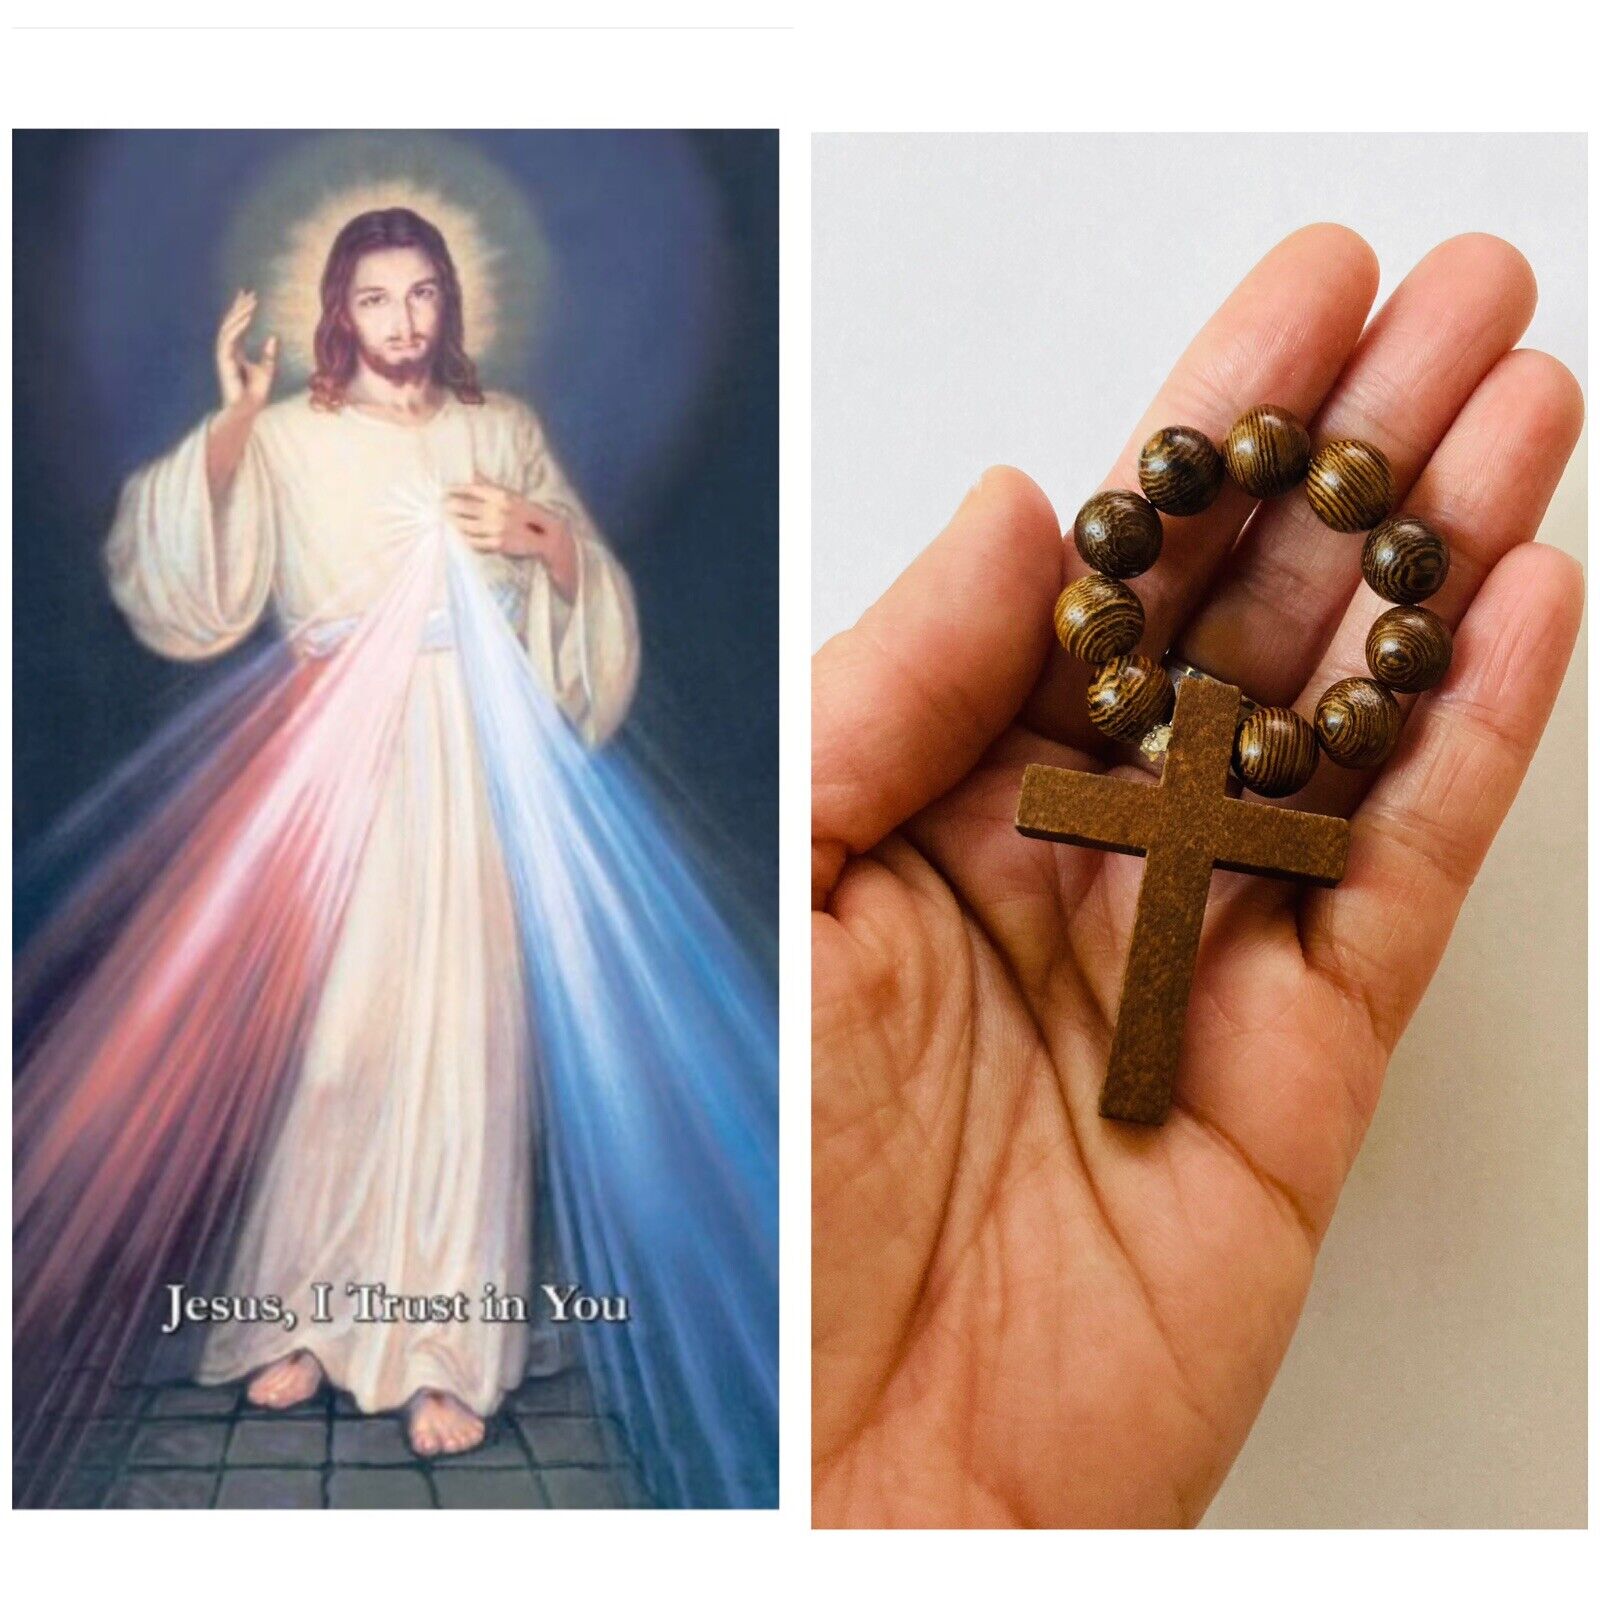 (5 copies) Chaplet of Divine Mercy Prayer Card  and Rosary Decades